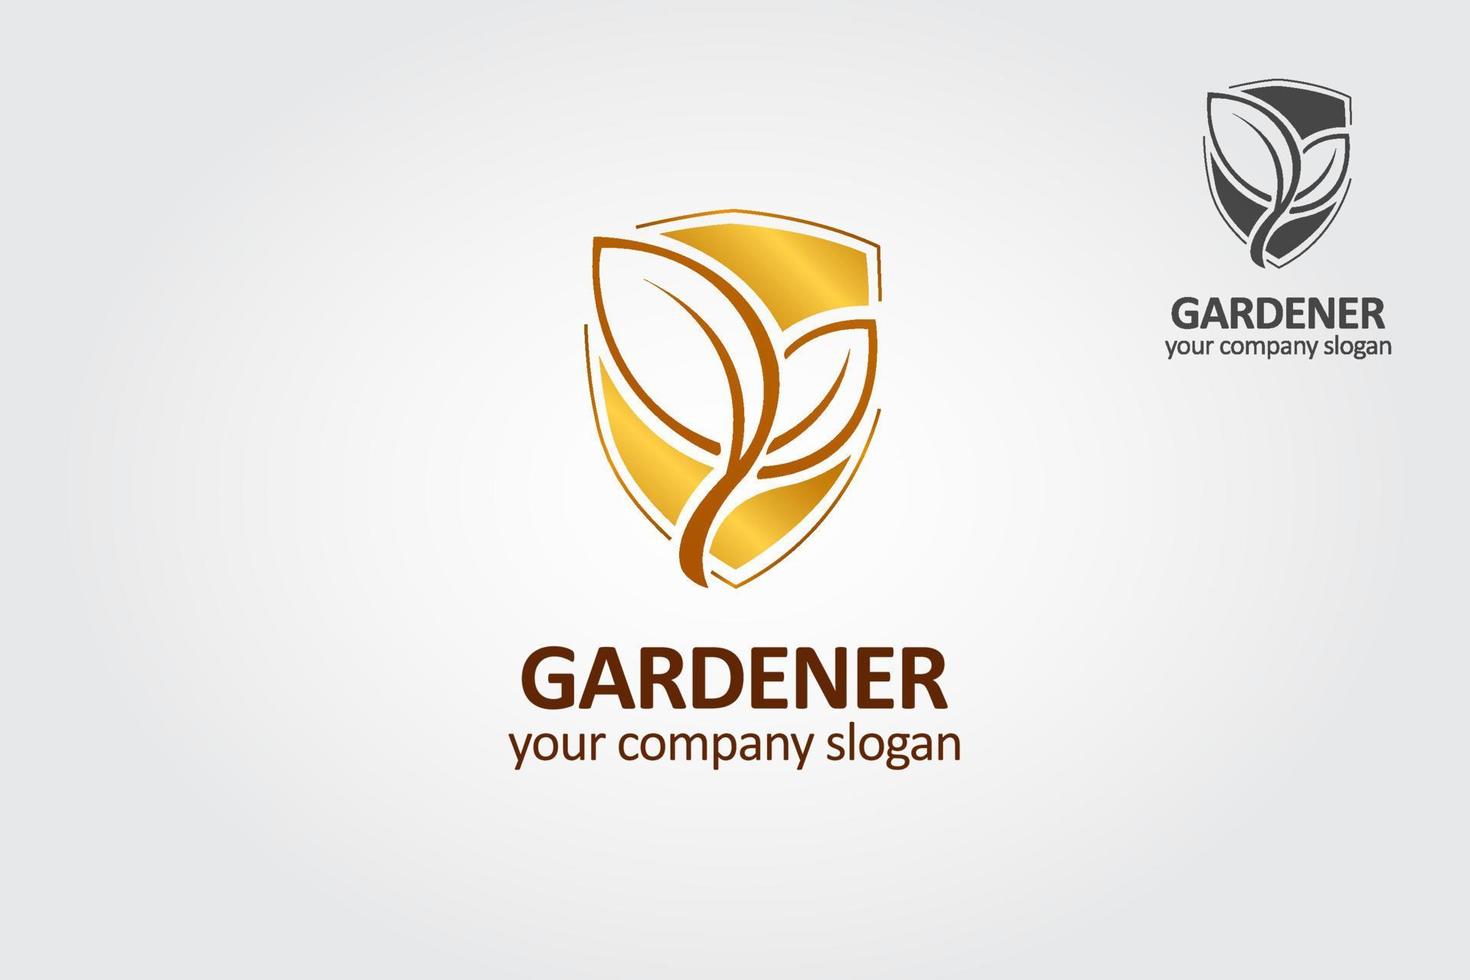 Gardener Vector Logo Template. Illustration of leaves on a gold shield background. This logo be used for landscape, gardening business, but also in fields related to nature.